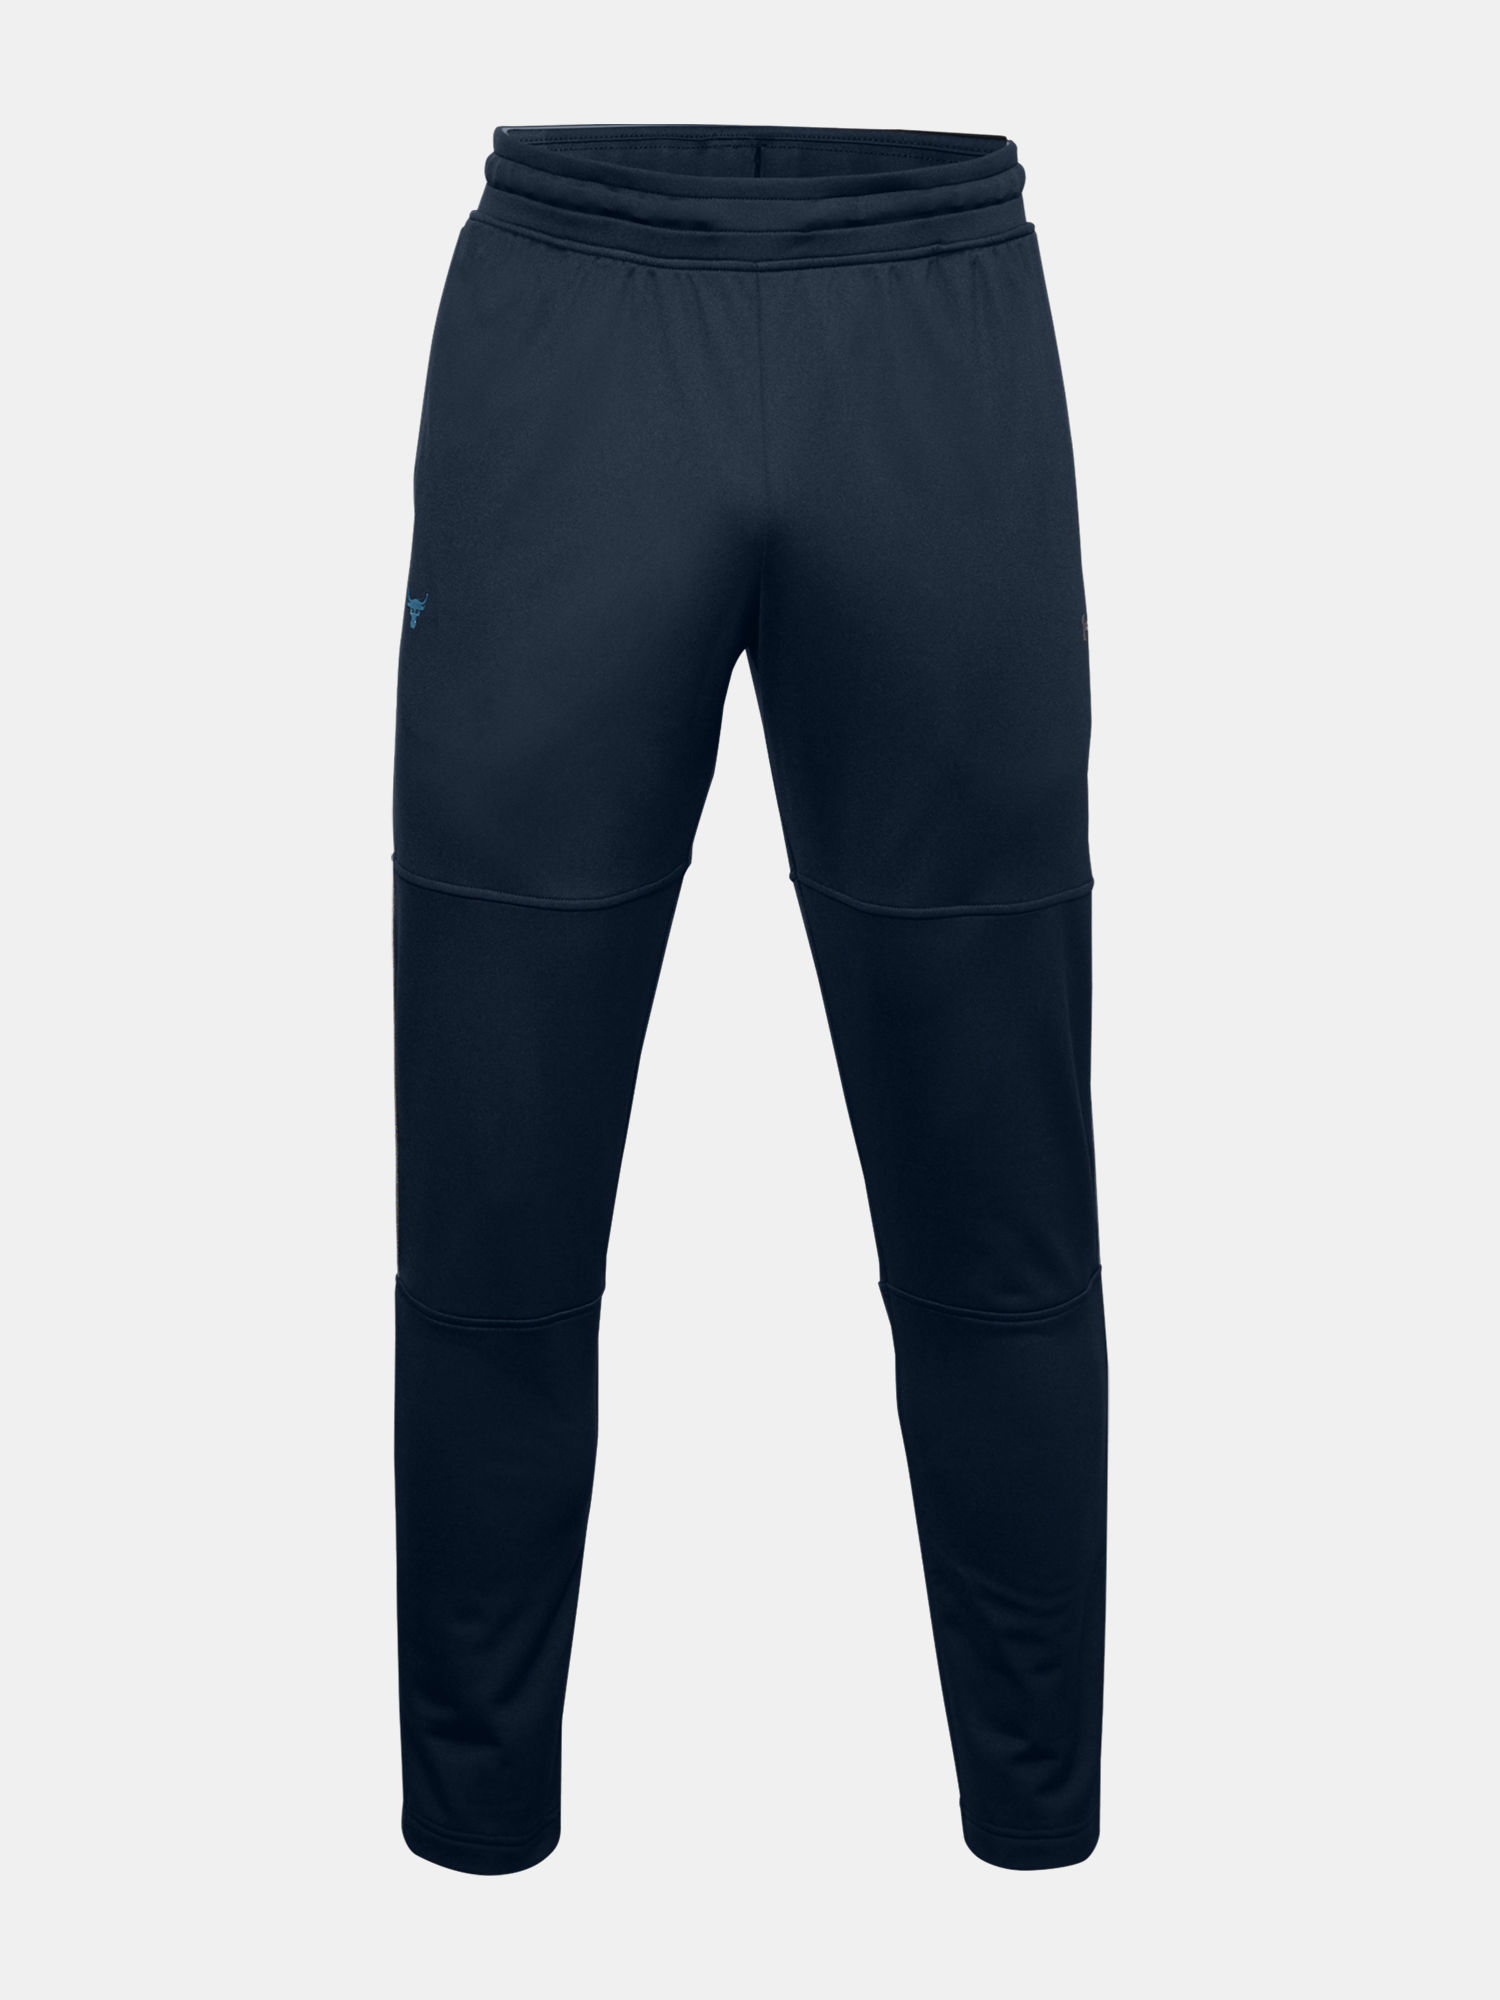 Nohavice Under Armour PJT ROCK KNIT TRACK PANT-NVY (3)